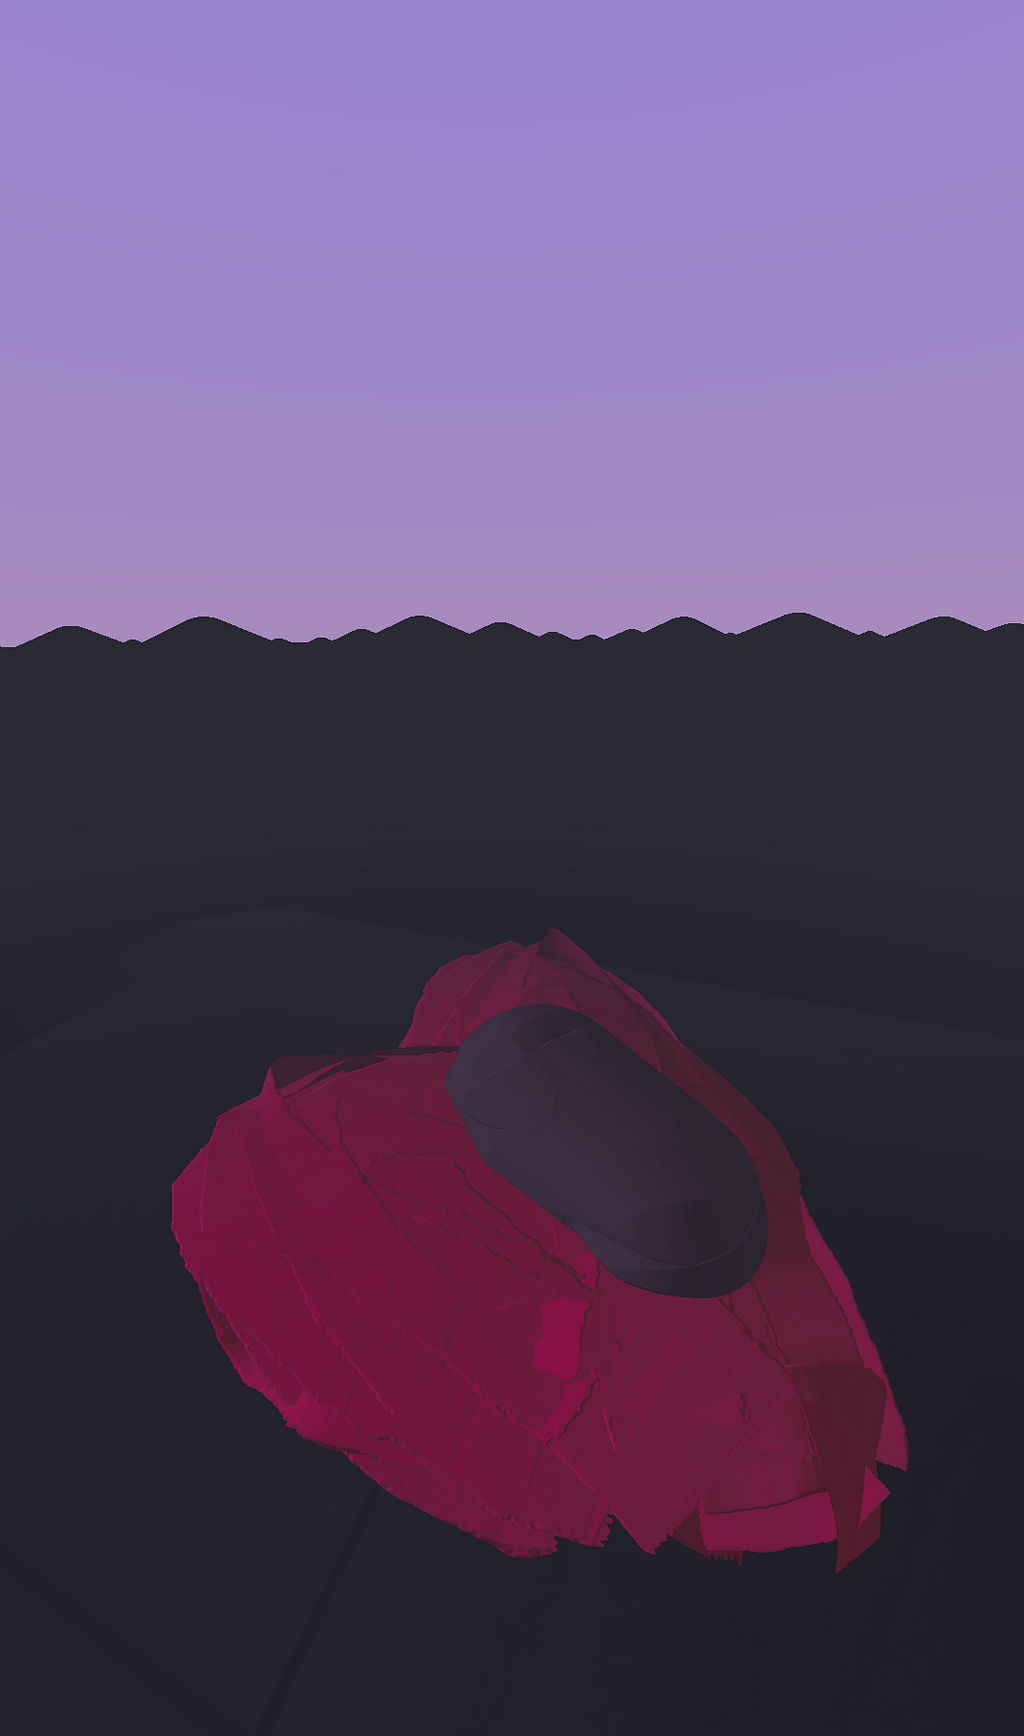 A small bundle rests on top of a large red heart. The ground and landscape are a dull gray, with mountains silhouetted in the distance. The sky is a twilight pinkish-purple hue, representing dawn.